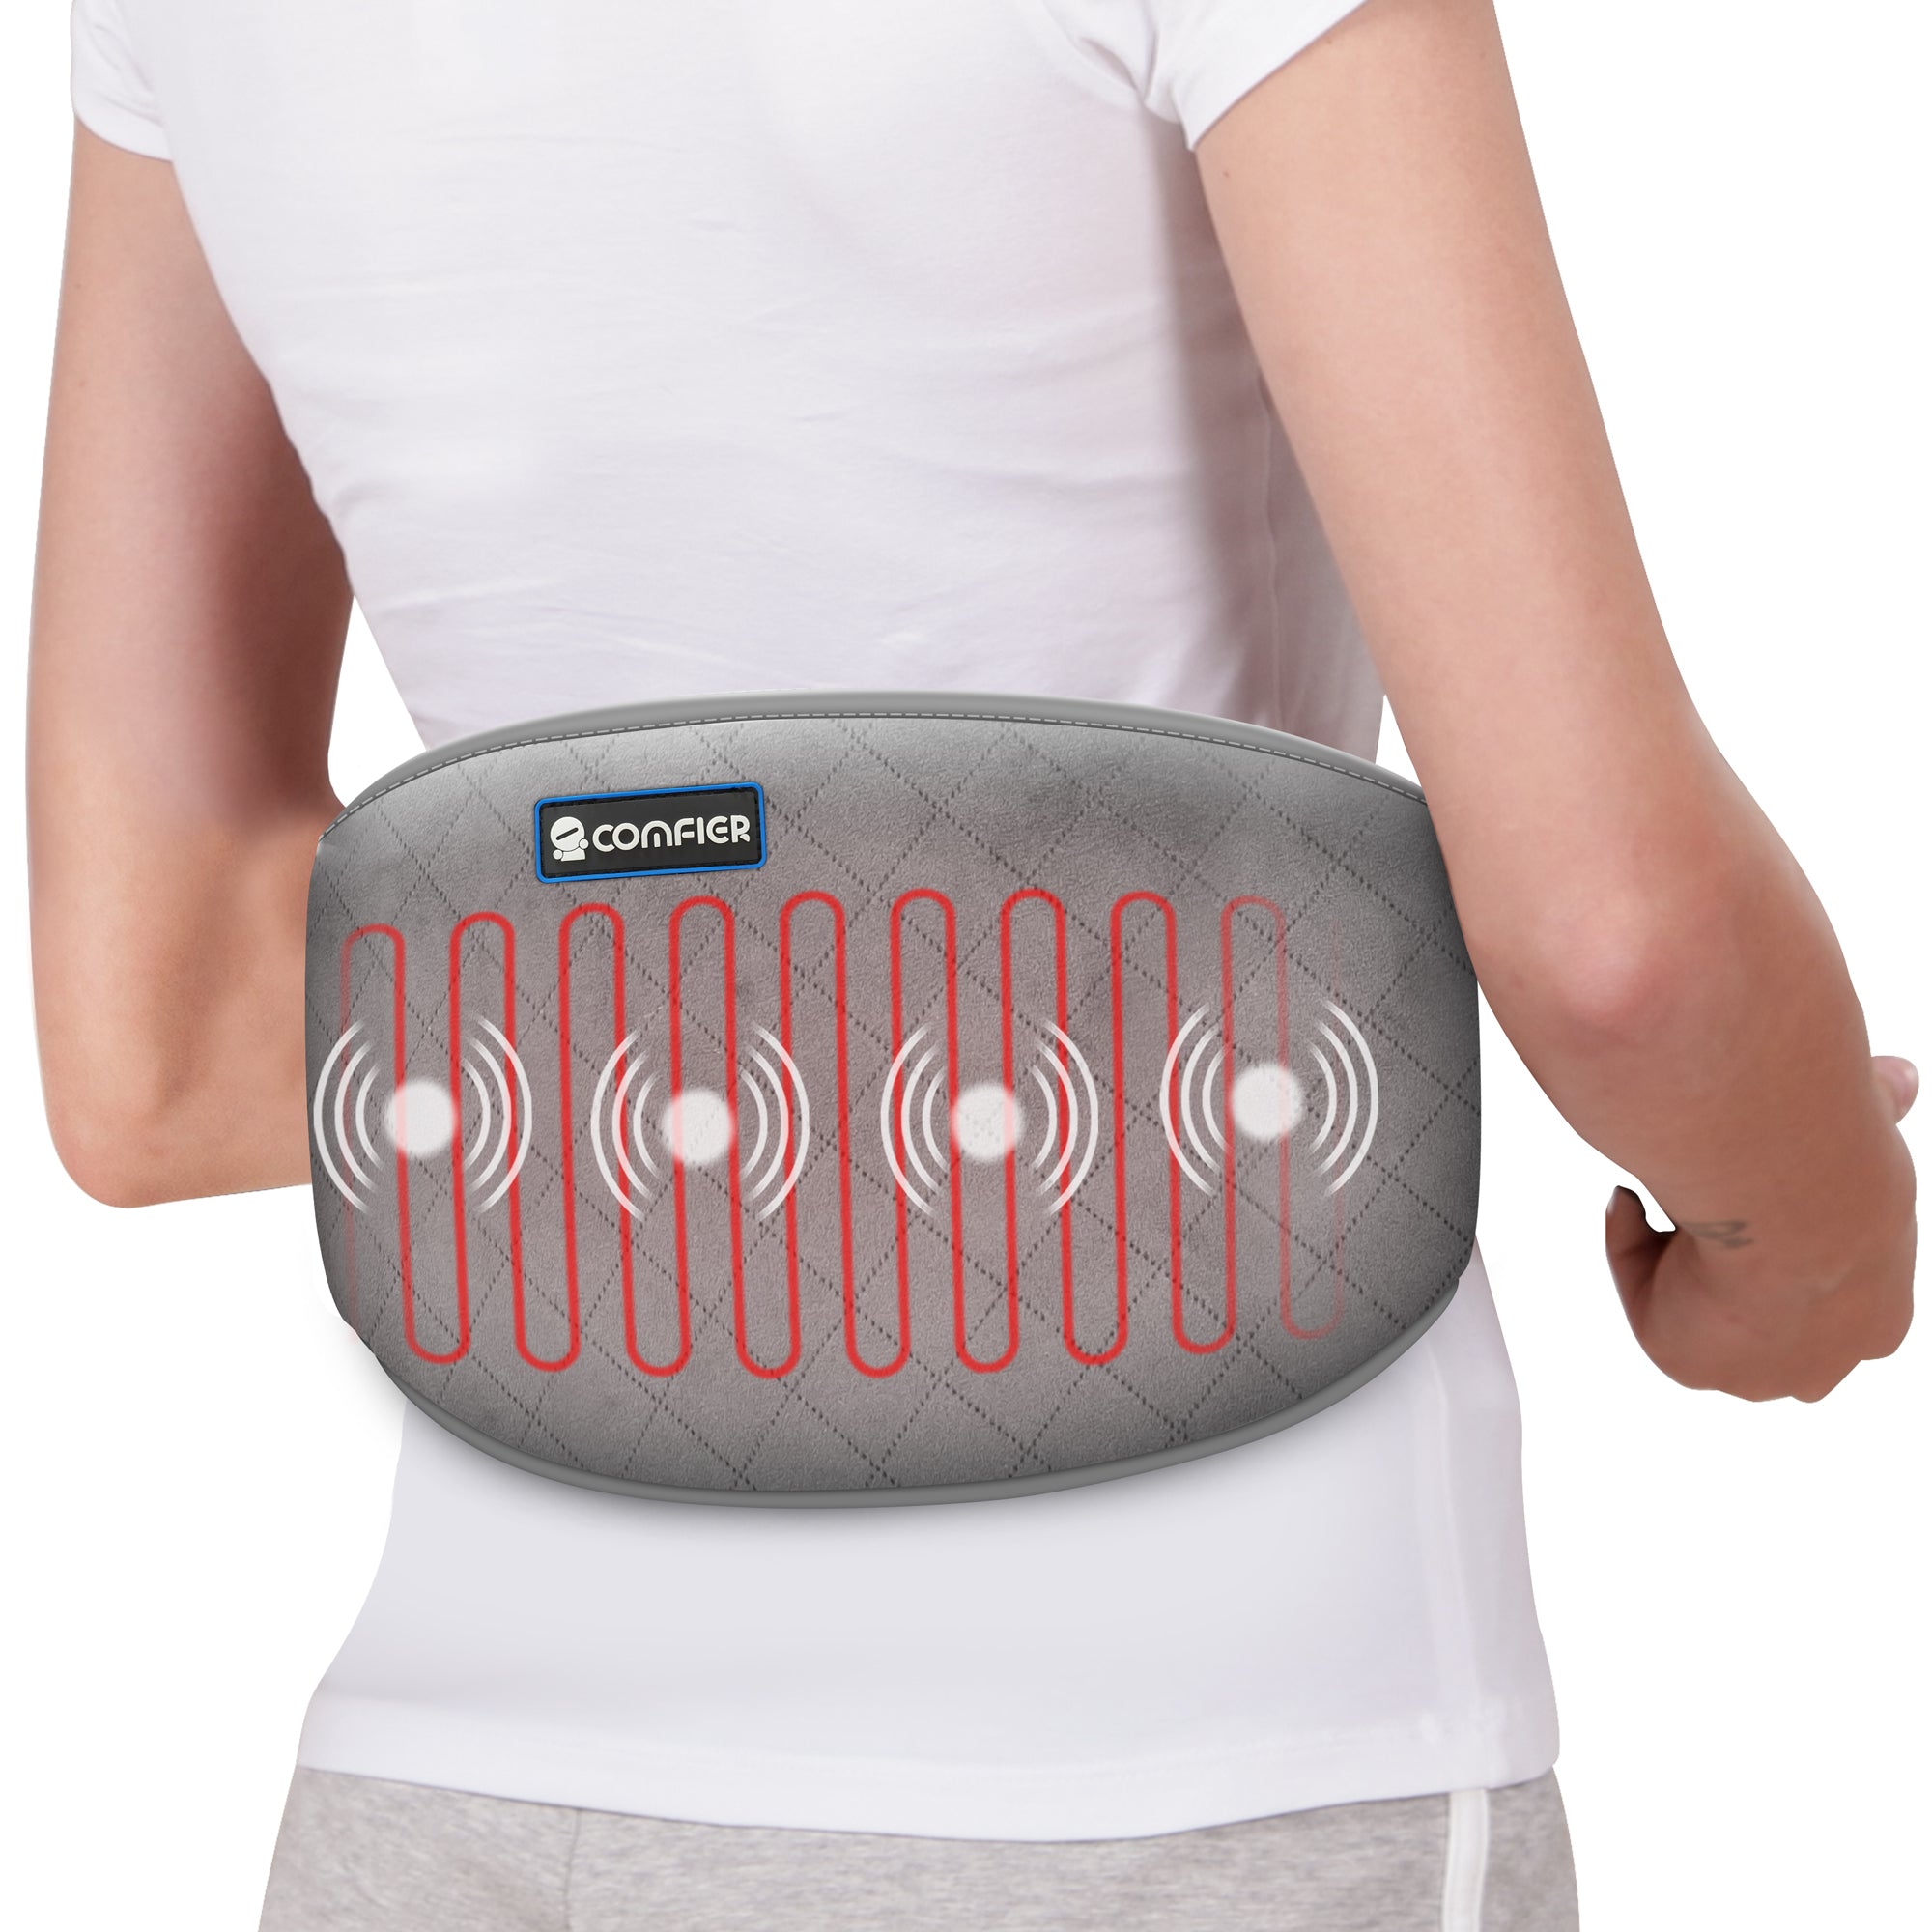 Comfier Heating Pad for Back Pain Relief, Heated Waist Massage Belt fo